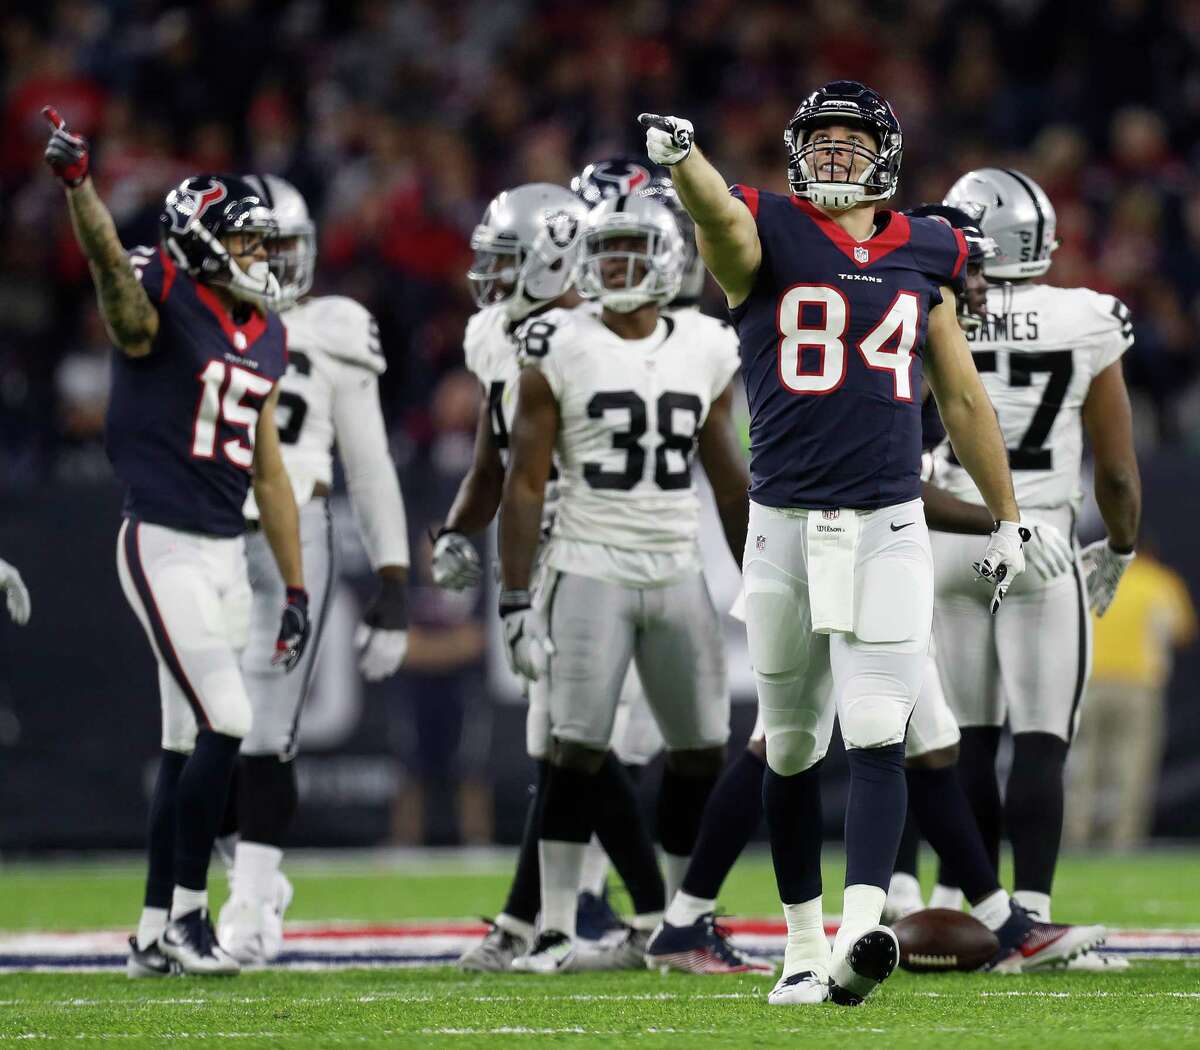 Houston Texans tight end Ryan Griffin (84) signals a first down after a run by running back Jonathan Grimes (41) during the fourth quarter of an NFL playoff game at NRG Stadium, January 7, 2017.